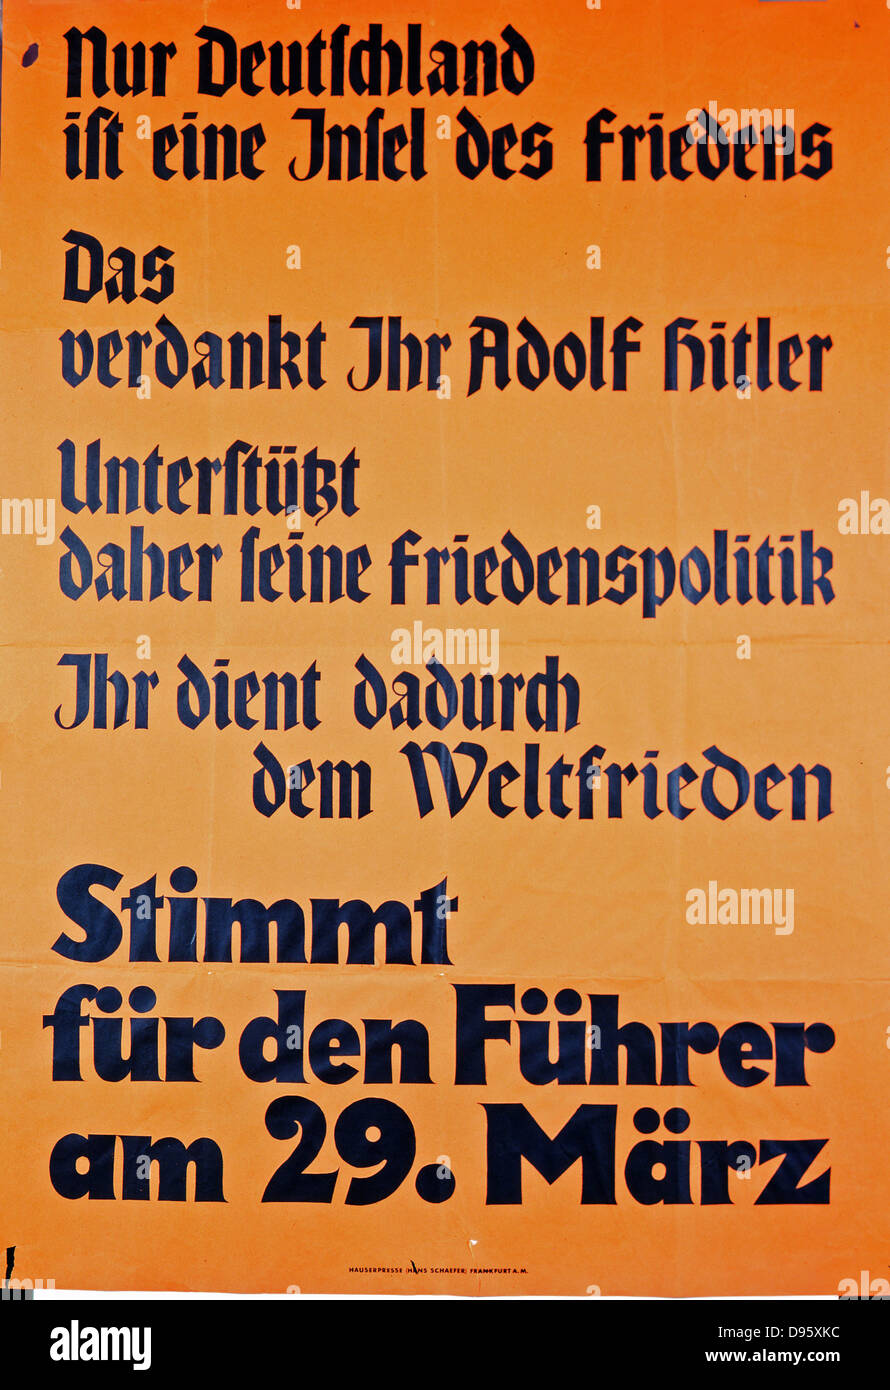 Election poster, Germany, exhorting people to vote for the Fuhrer (Hitler) on 29 March 1933. Stock Photo